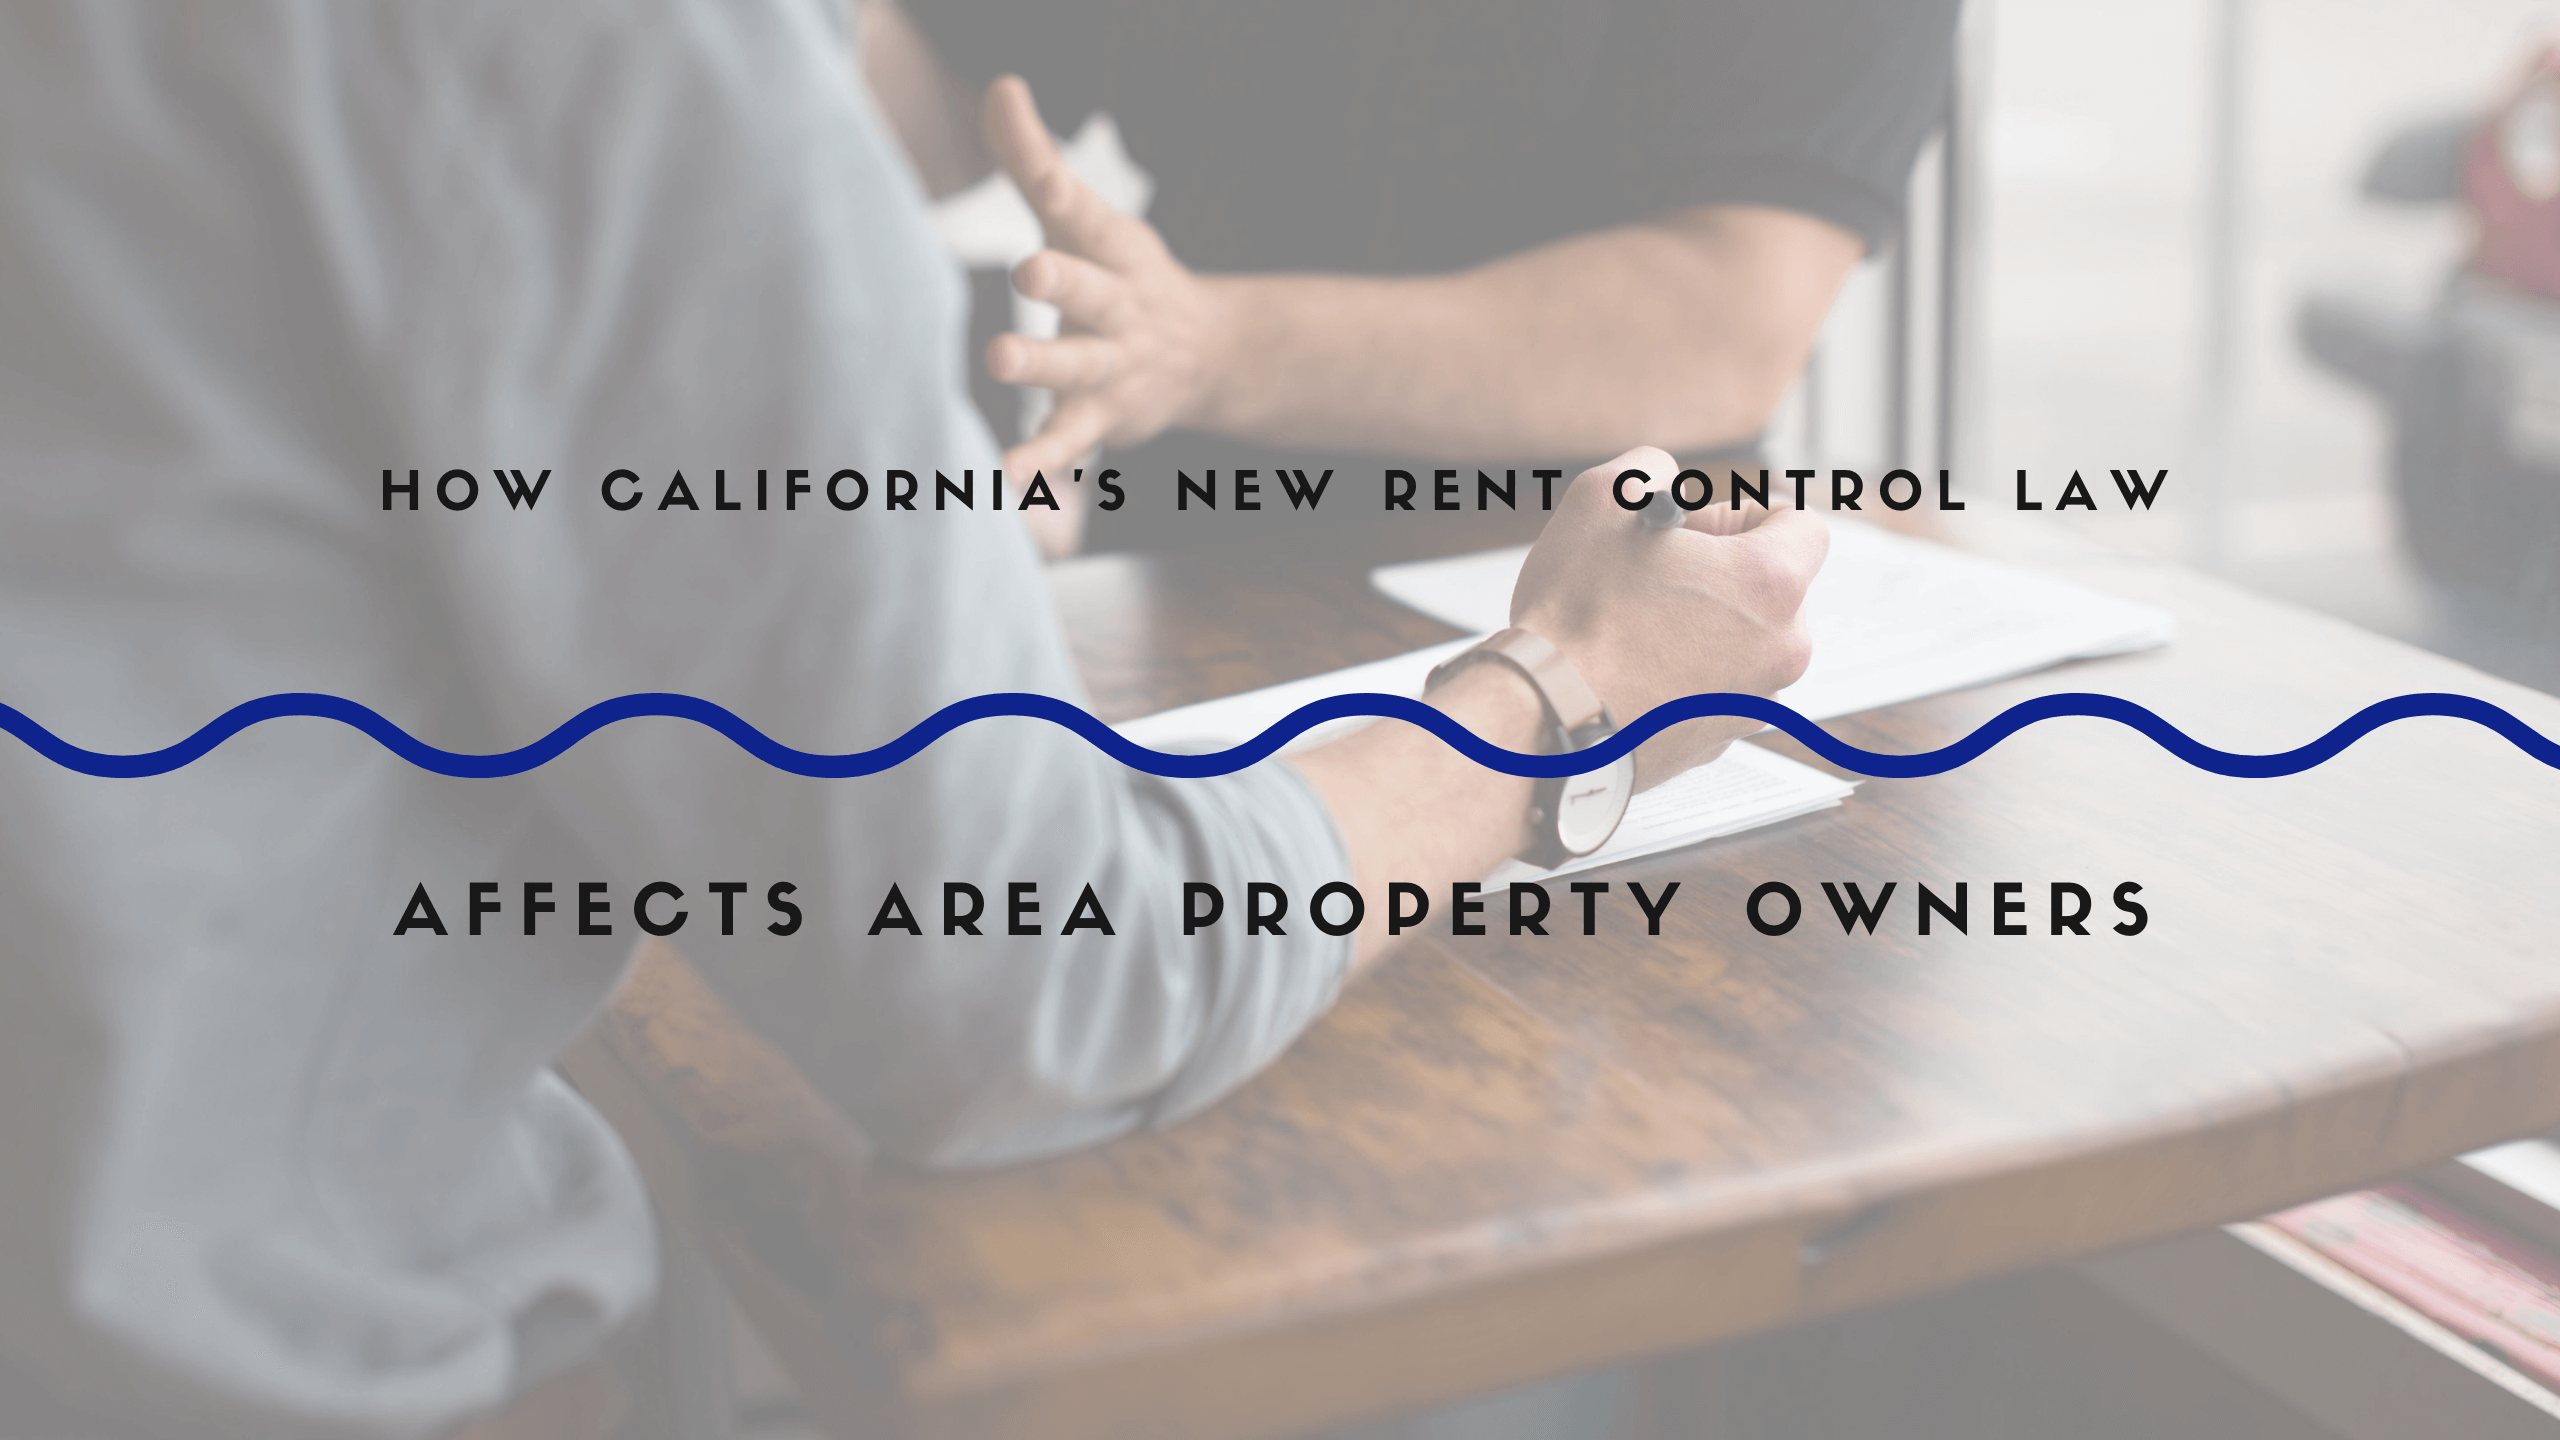 How California’s New Rent Control Law Affects Los Angeles Area Property Owners